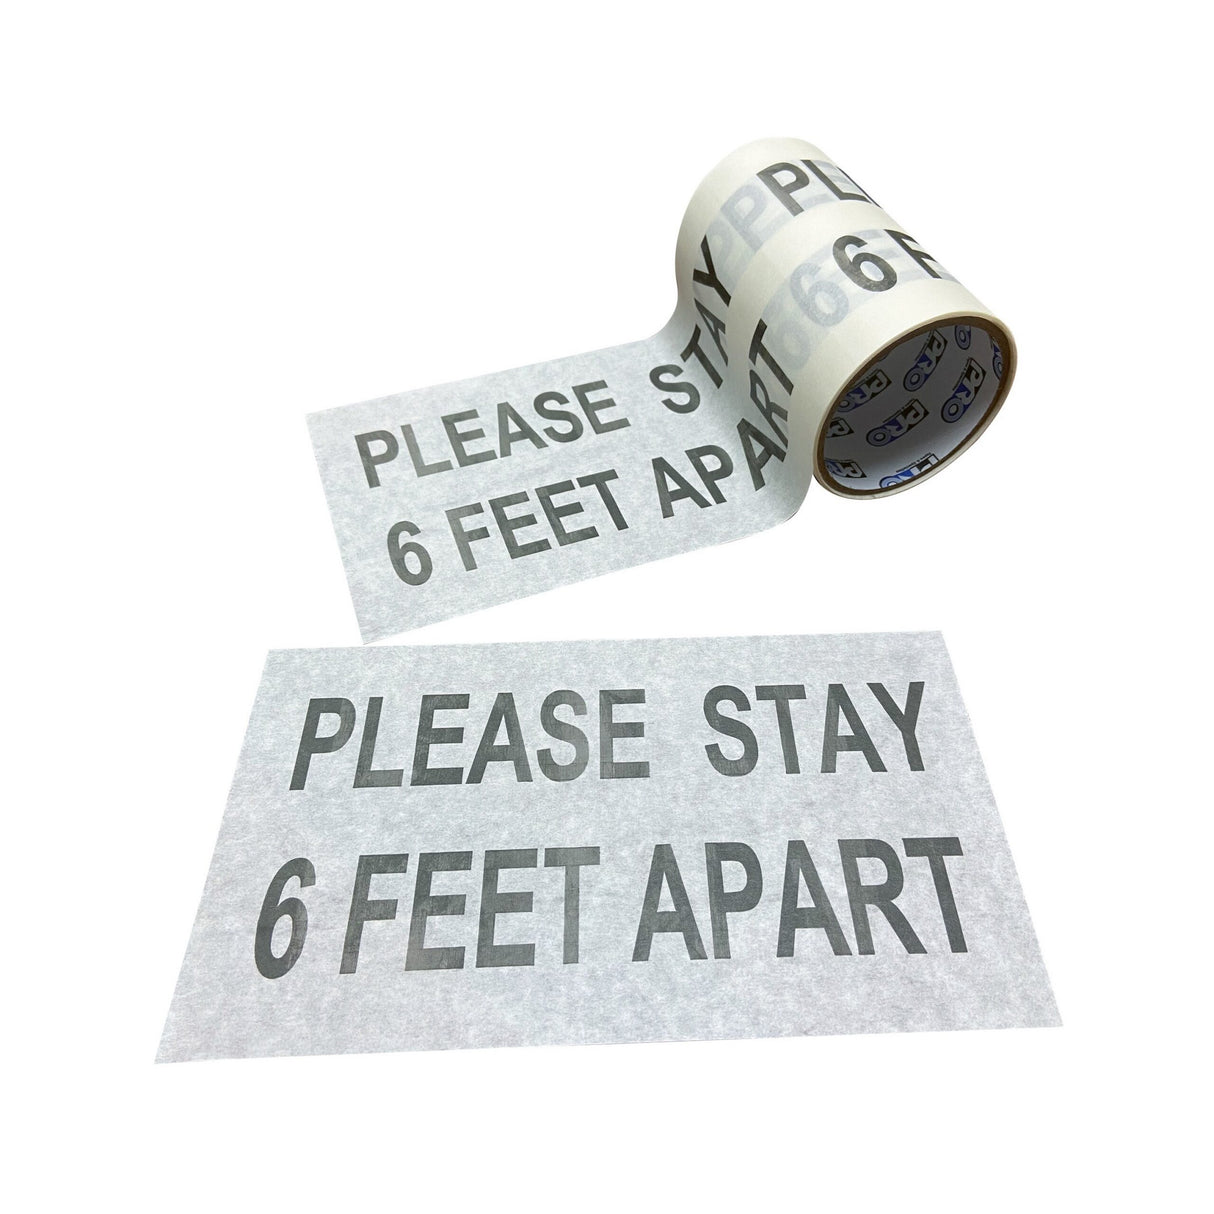 Pro Tapes PRO 4000 Please Stay 6 Feet Apart 6 x 10 Adhesive Back Social Distancing Stickers, White